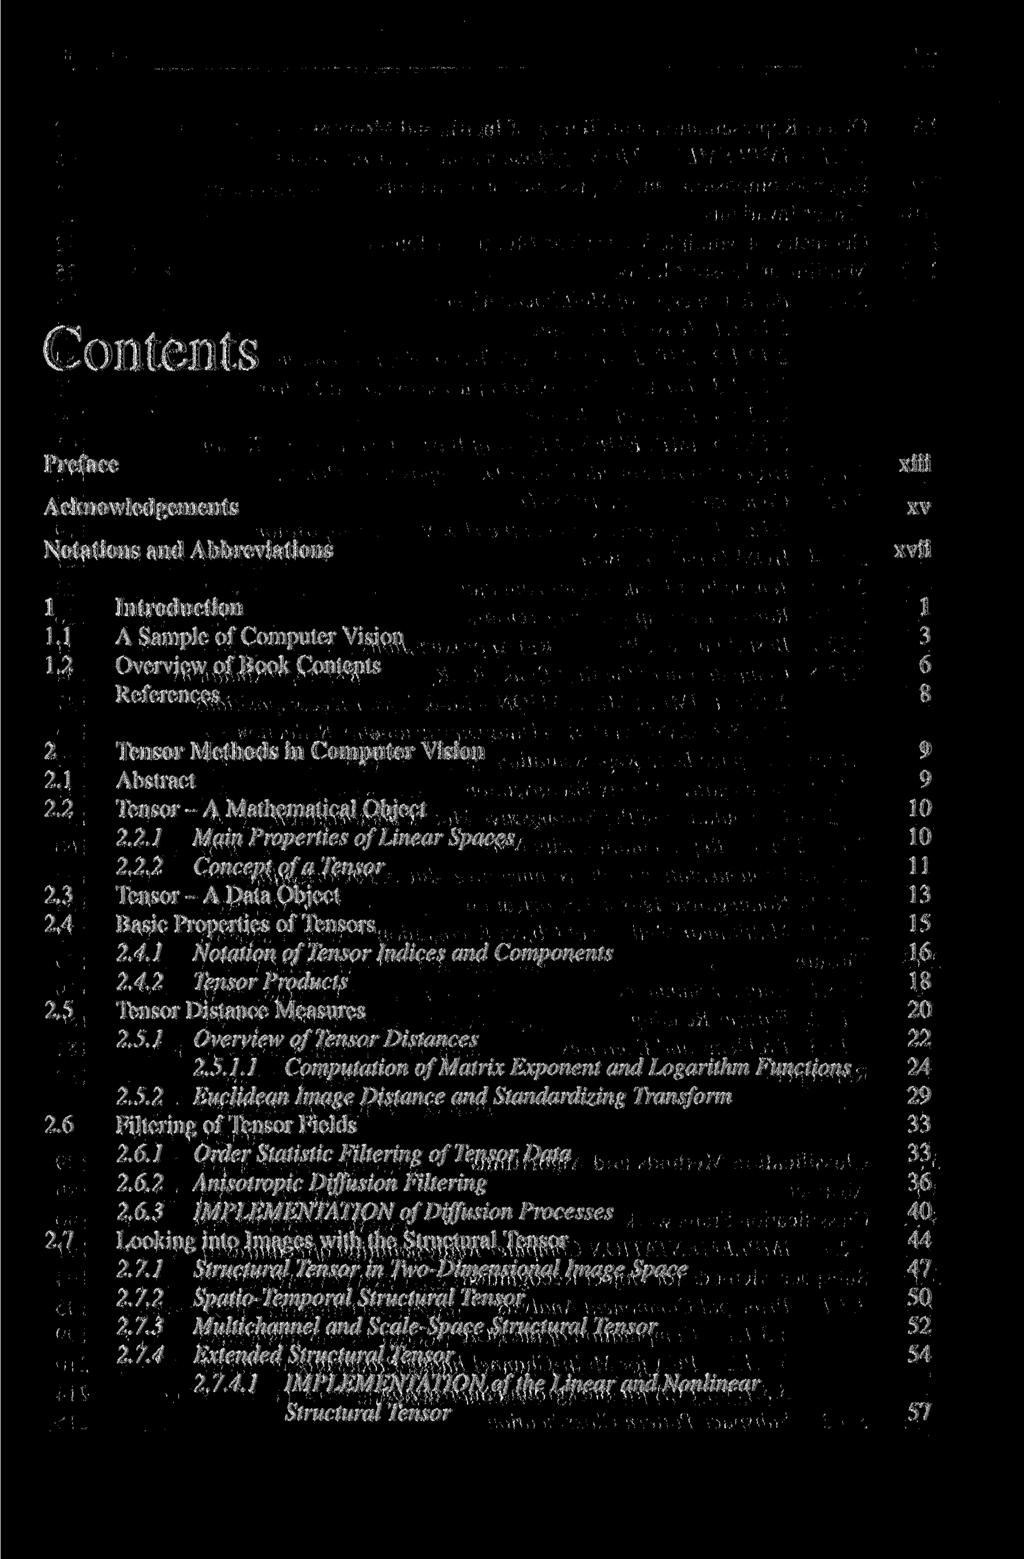 Contents Preface Acknowledgements Notations and Abbreviations xiii xv xvii 1 Introduction 1 1.1 A Sample of Computer Vision 3 1.